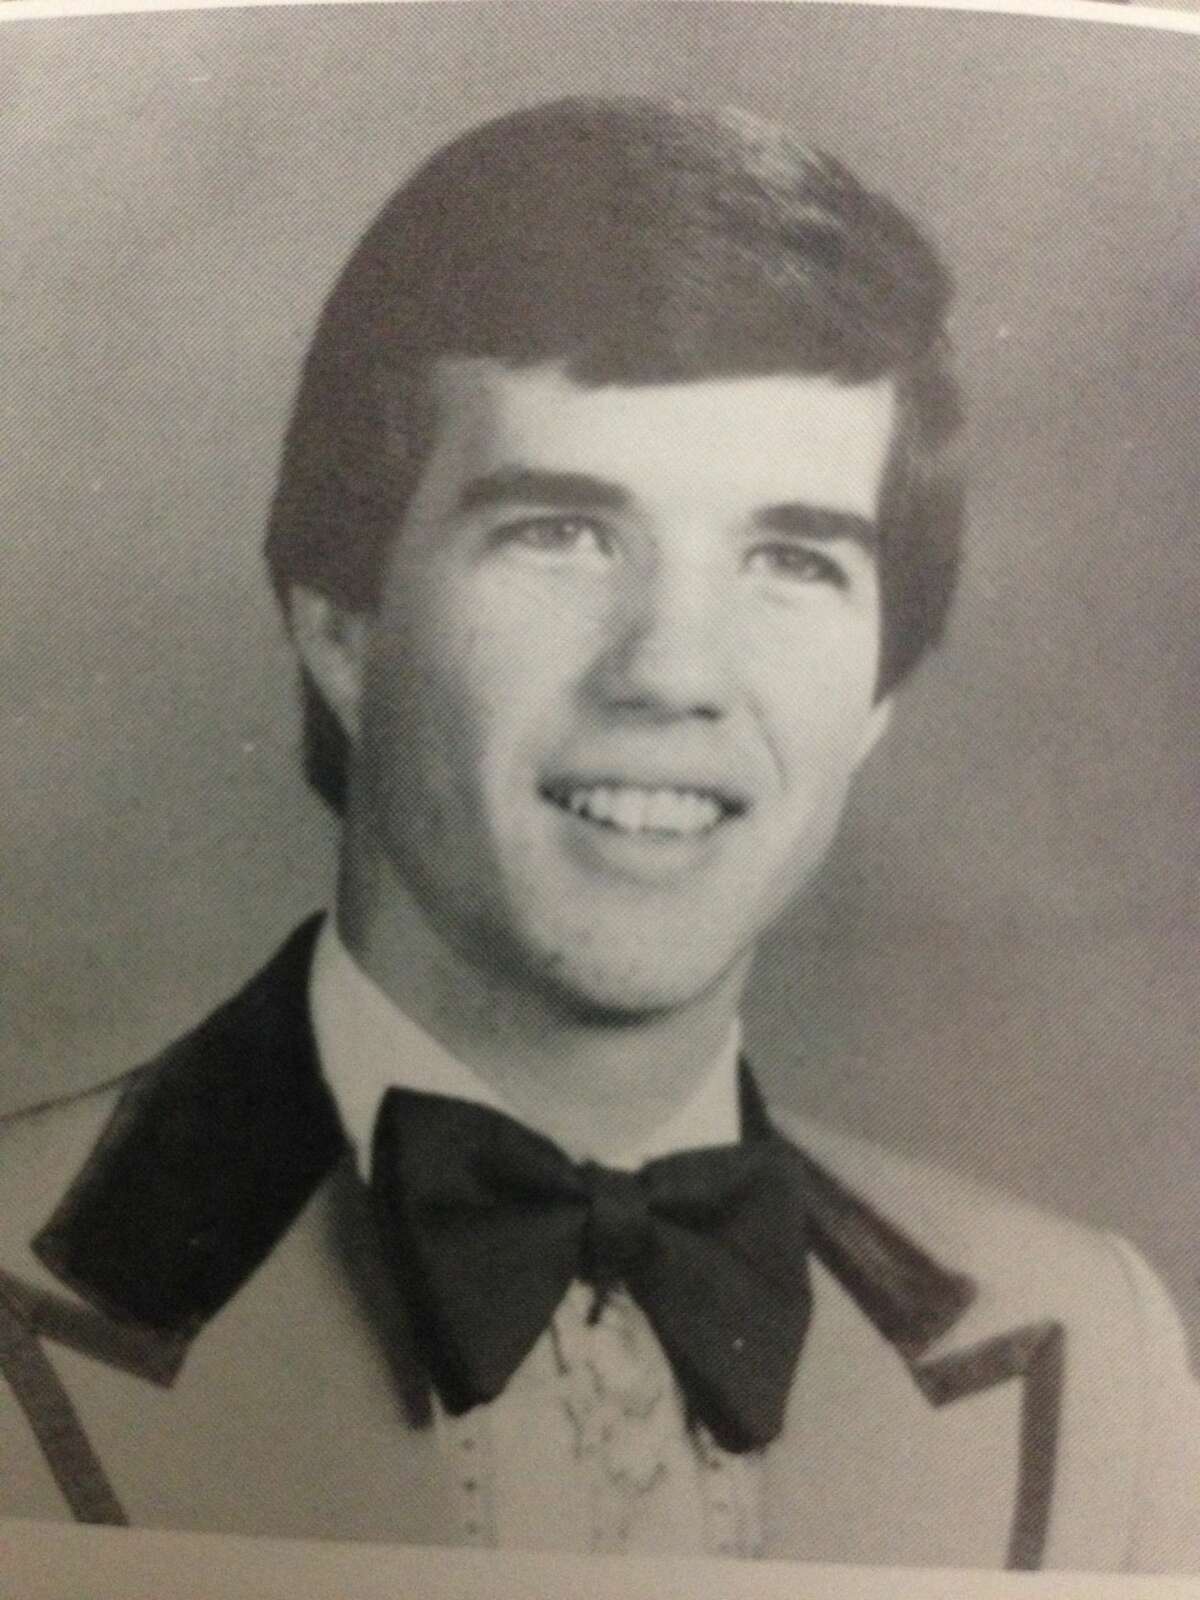 KENS5 anchorman Jeff Brady in his graduation picture from Georgetown High, Class of ’82